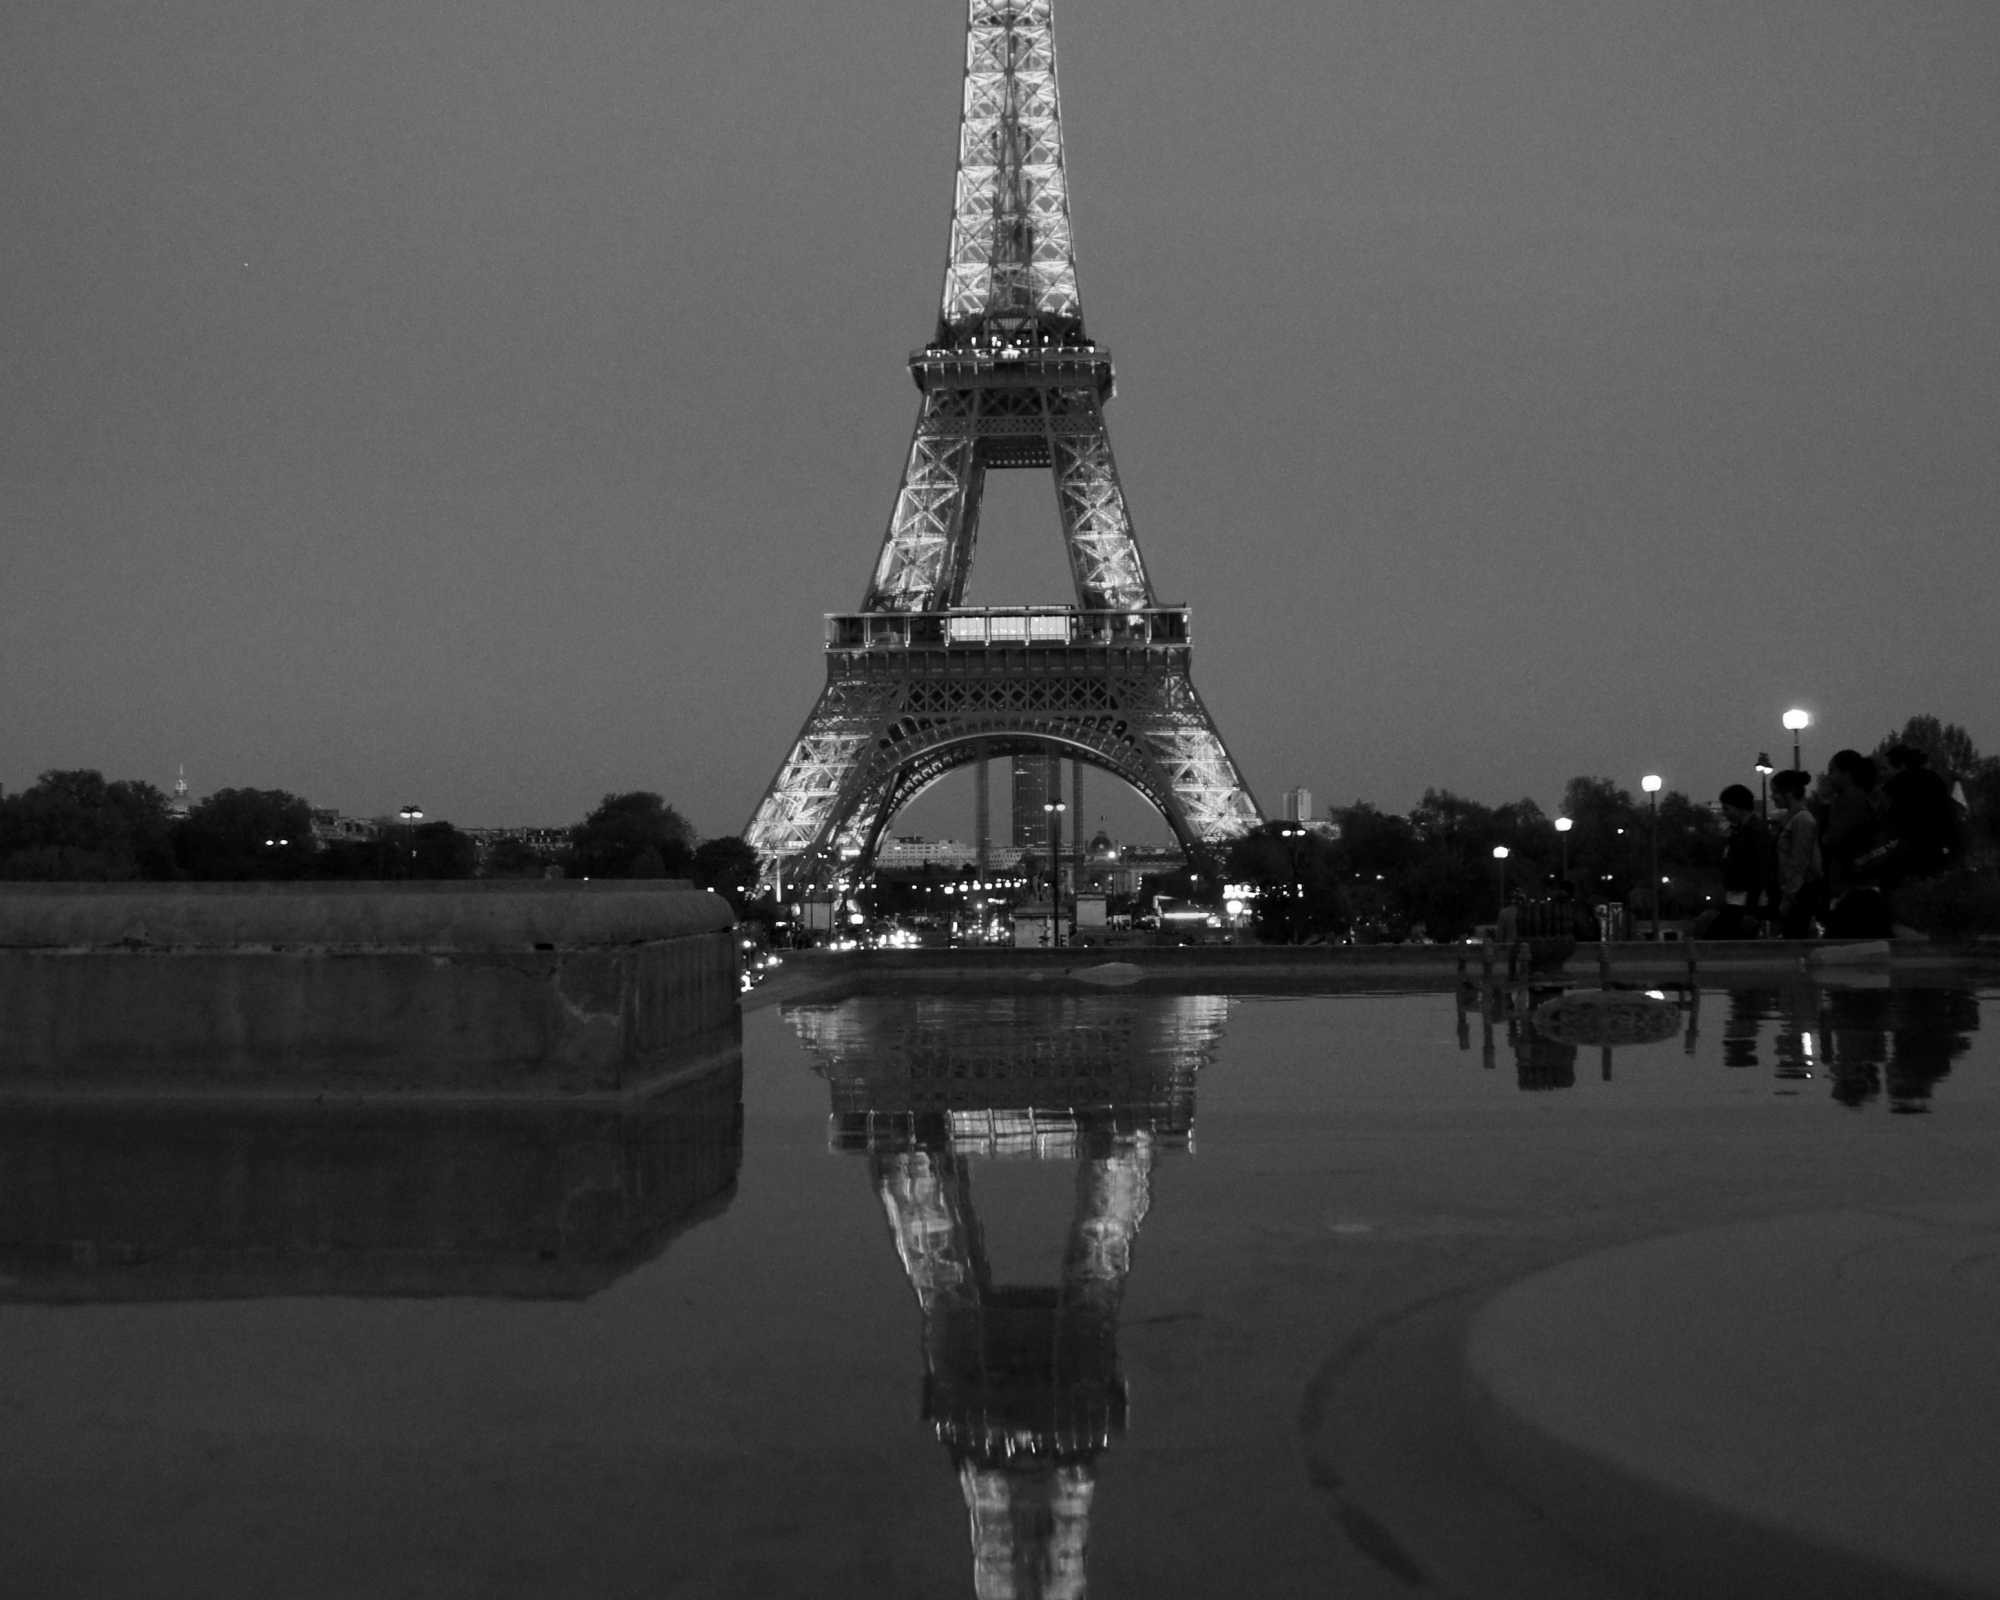 Night at the Eiffel Tower